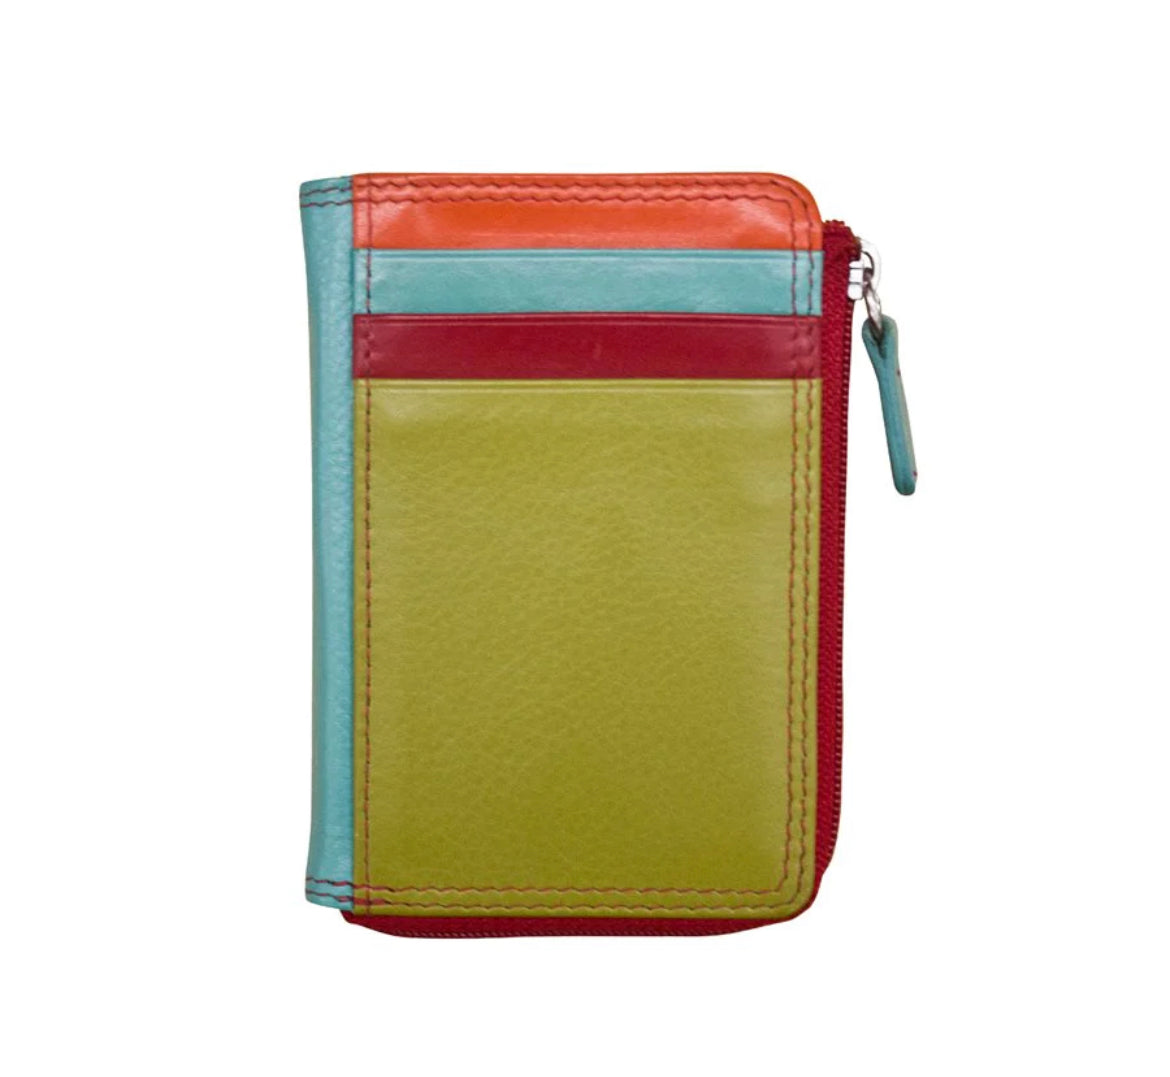 ili New York RFID Zippered Card Case Leather Wallet